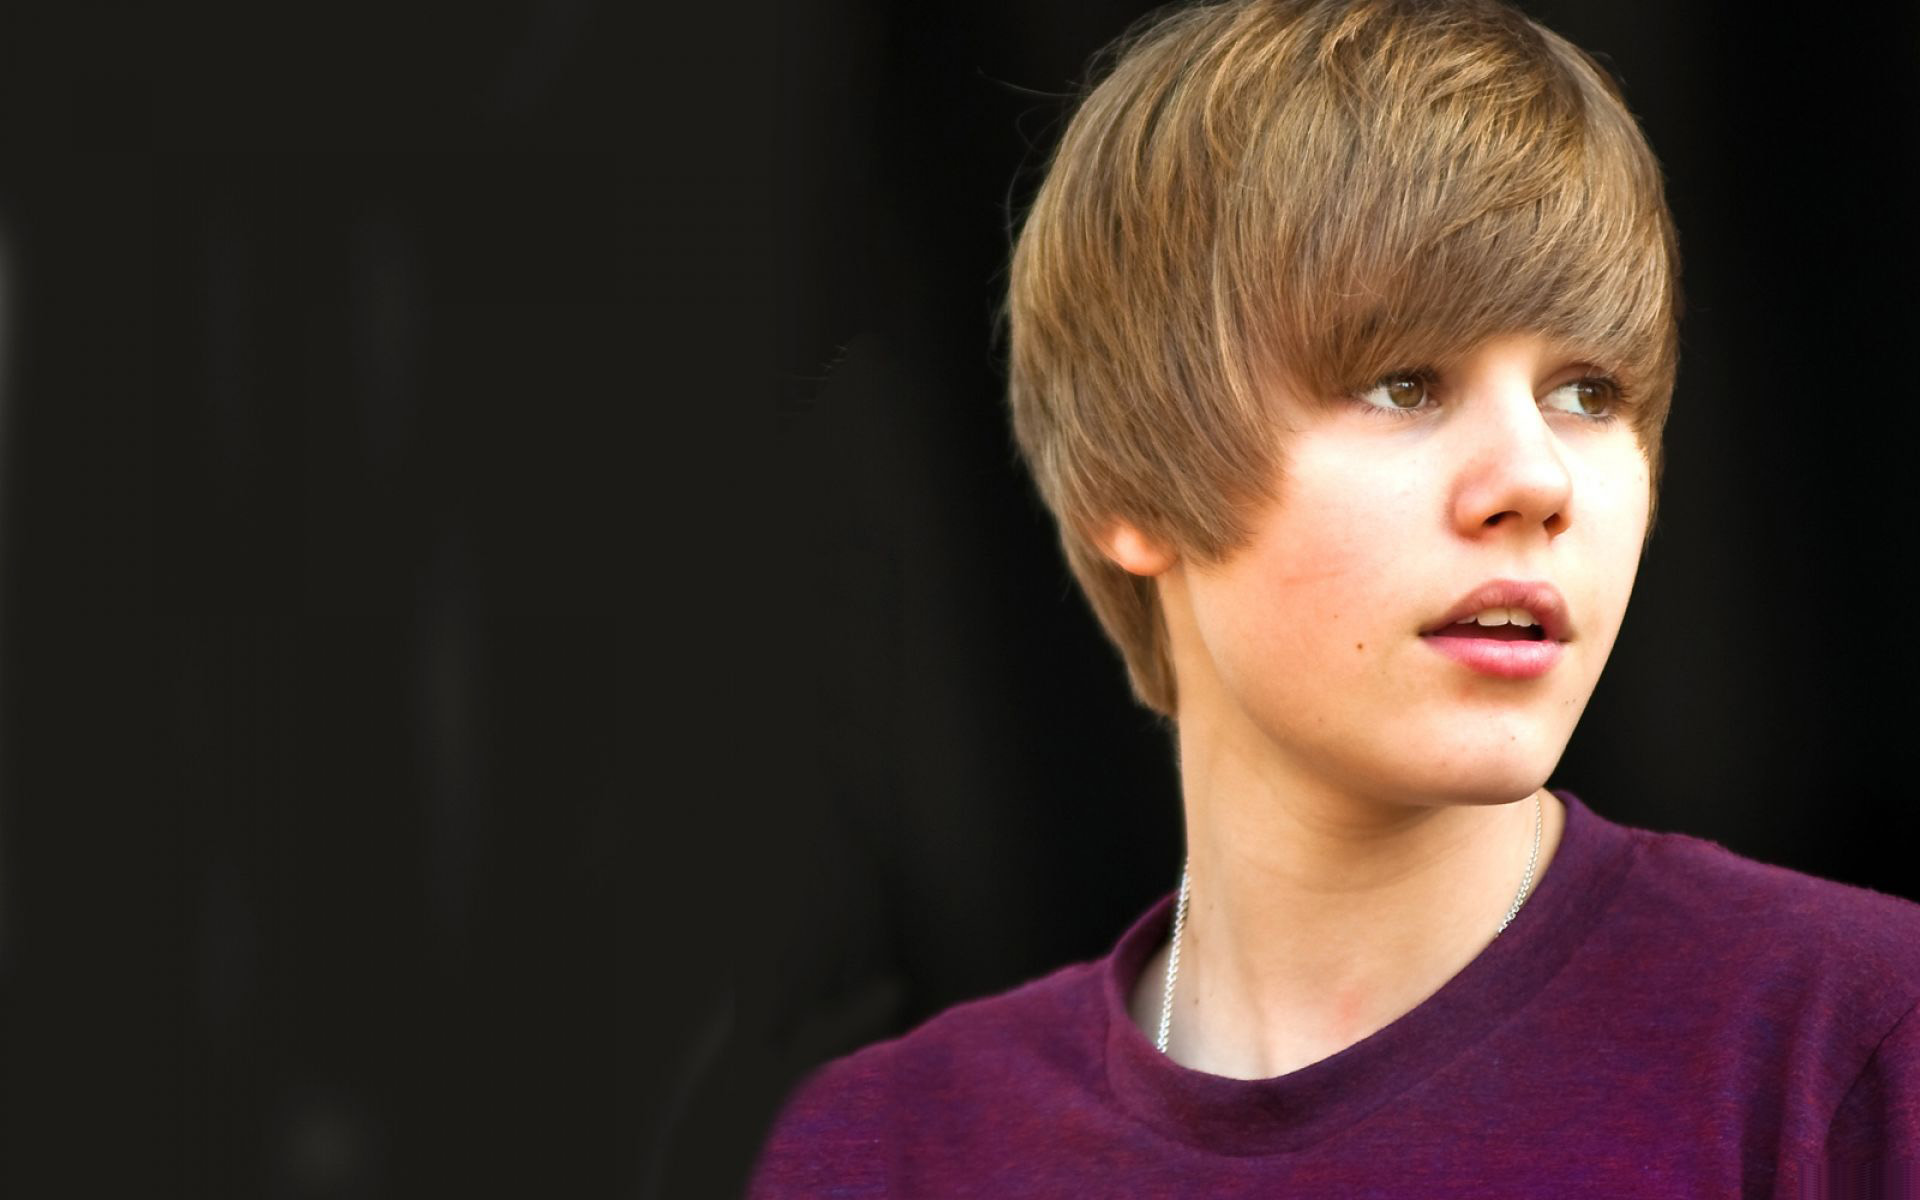 justin bieber hd wallpaper which is under the celebrity wallpapers